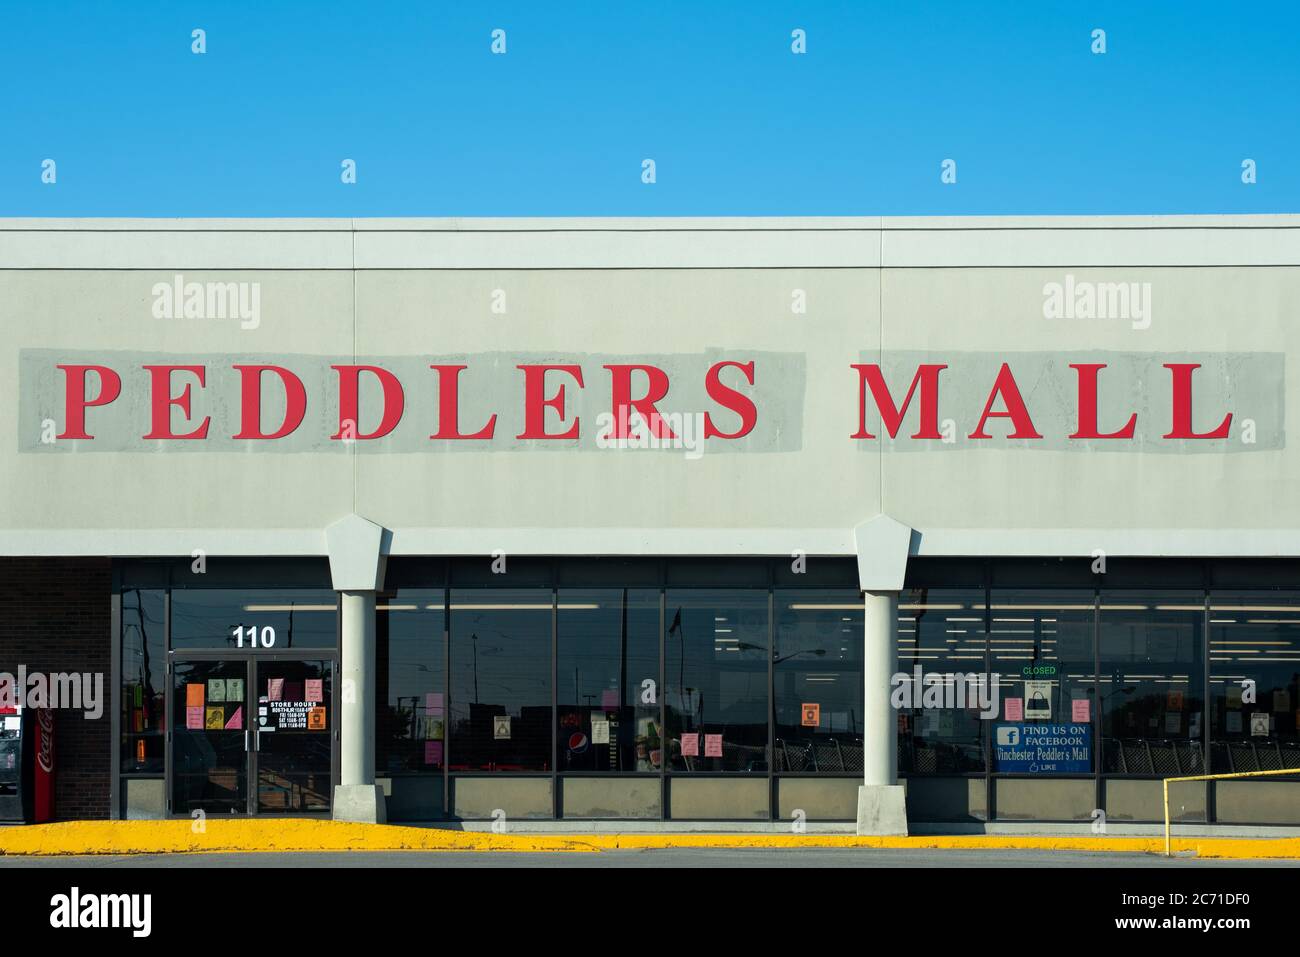 Exterior view of a Peddlers Mall store Stock Photo